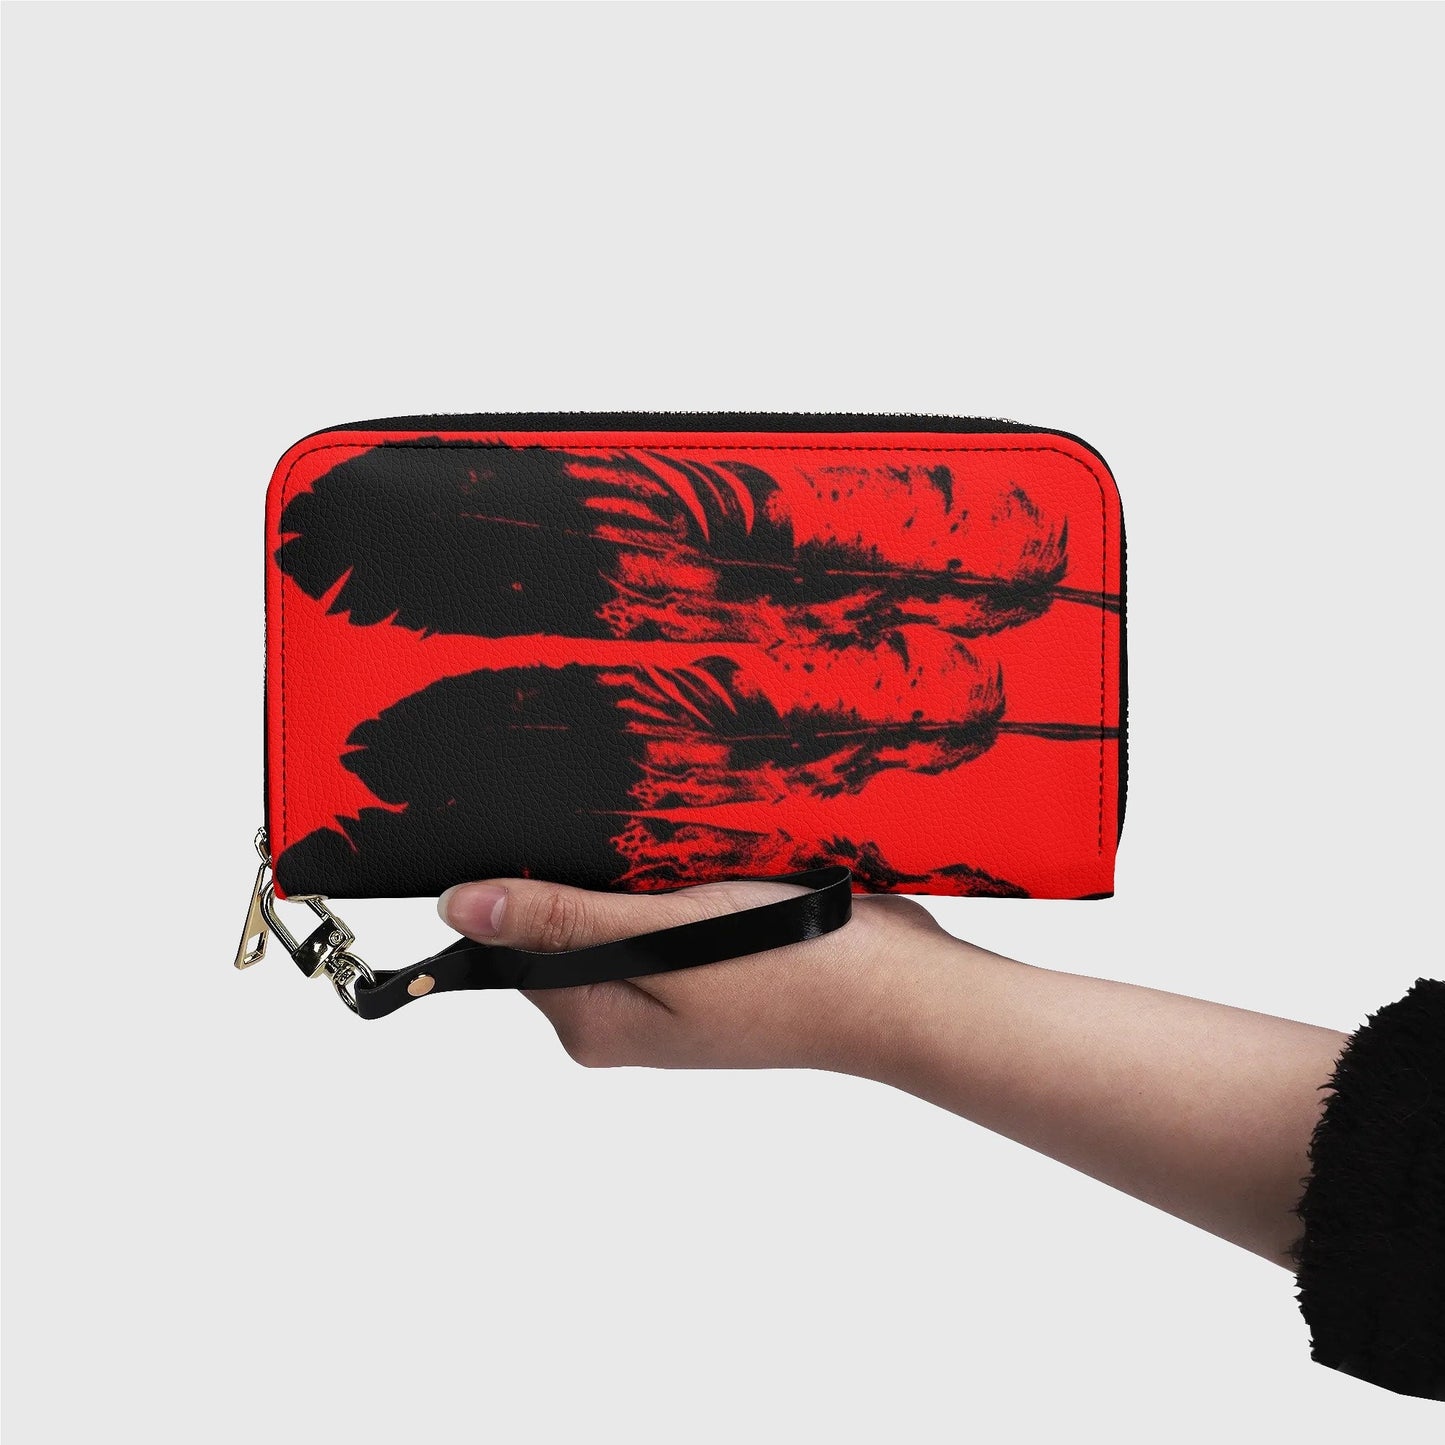 red*indigenous*native*american*eagle*feather*zipper*wallet*women's